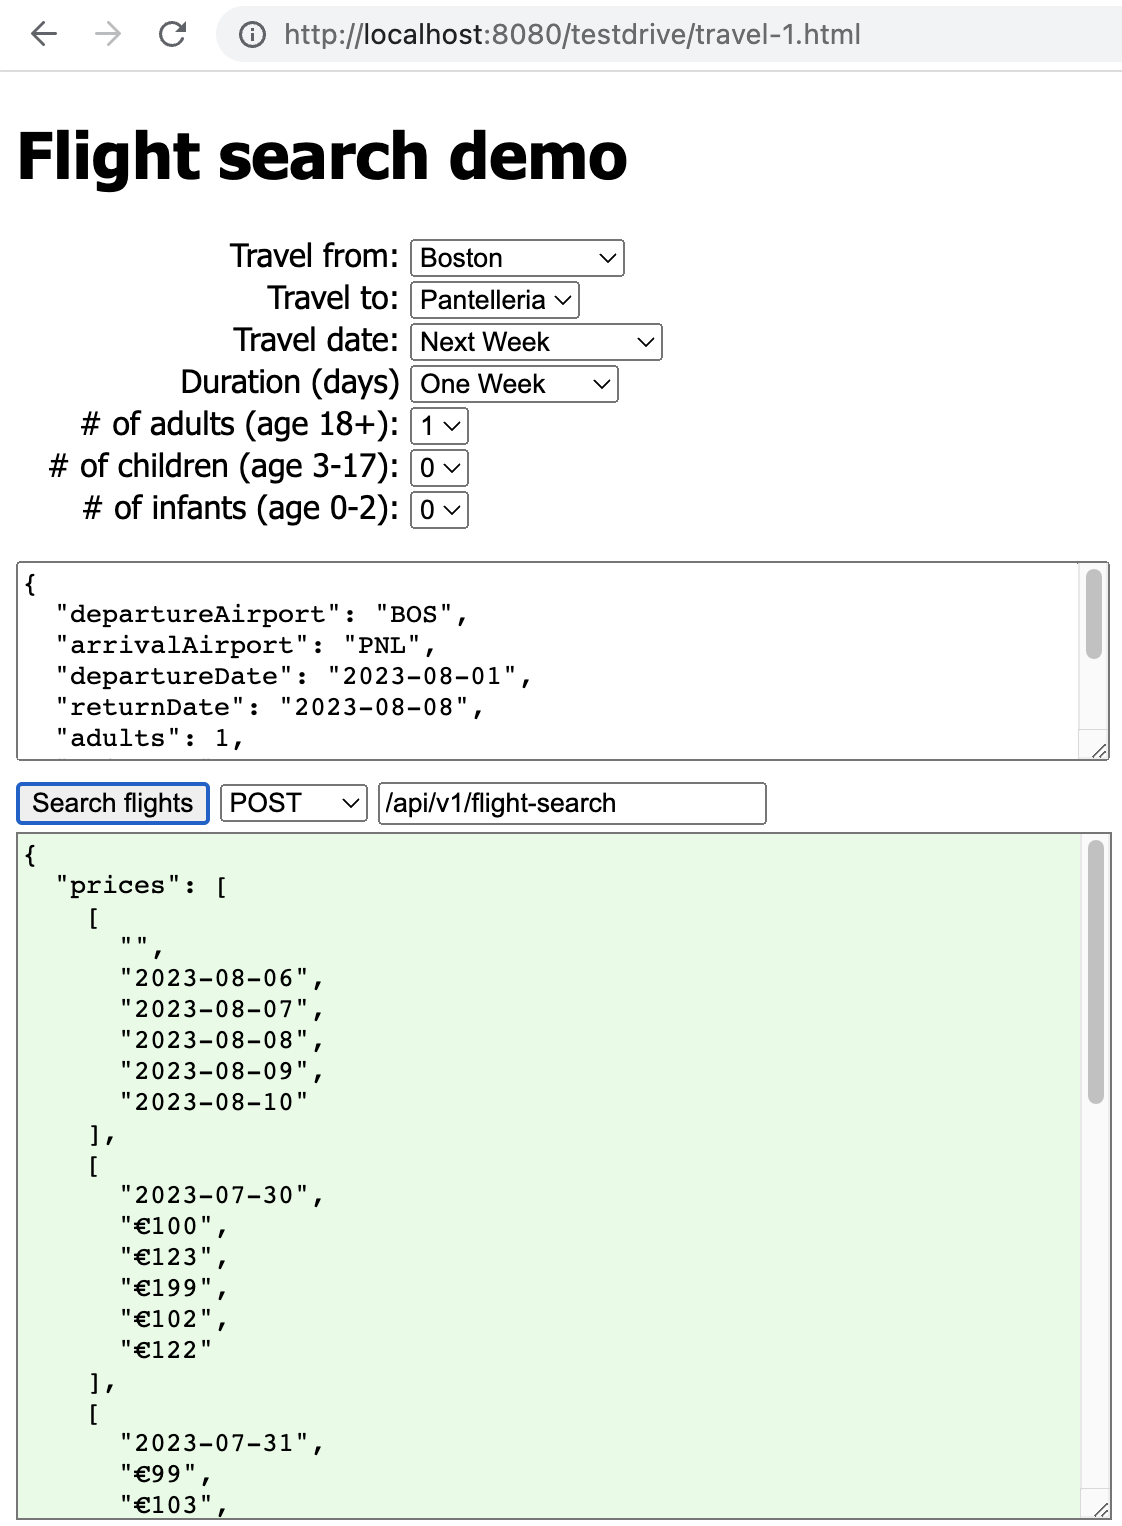 The same page, now showing part of a complex         JSON response